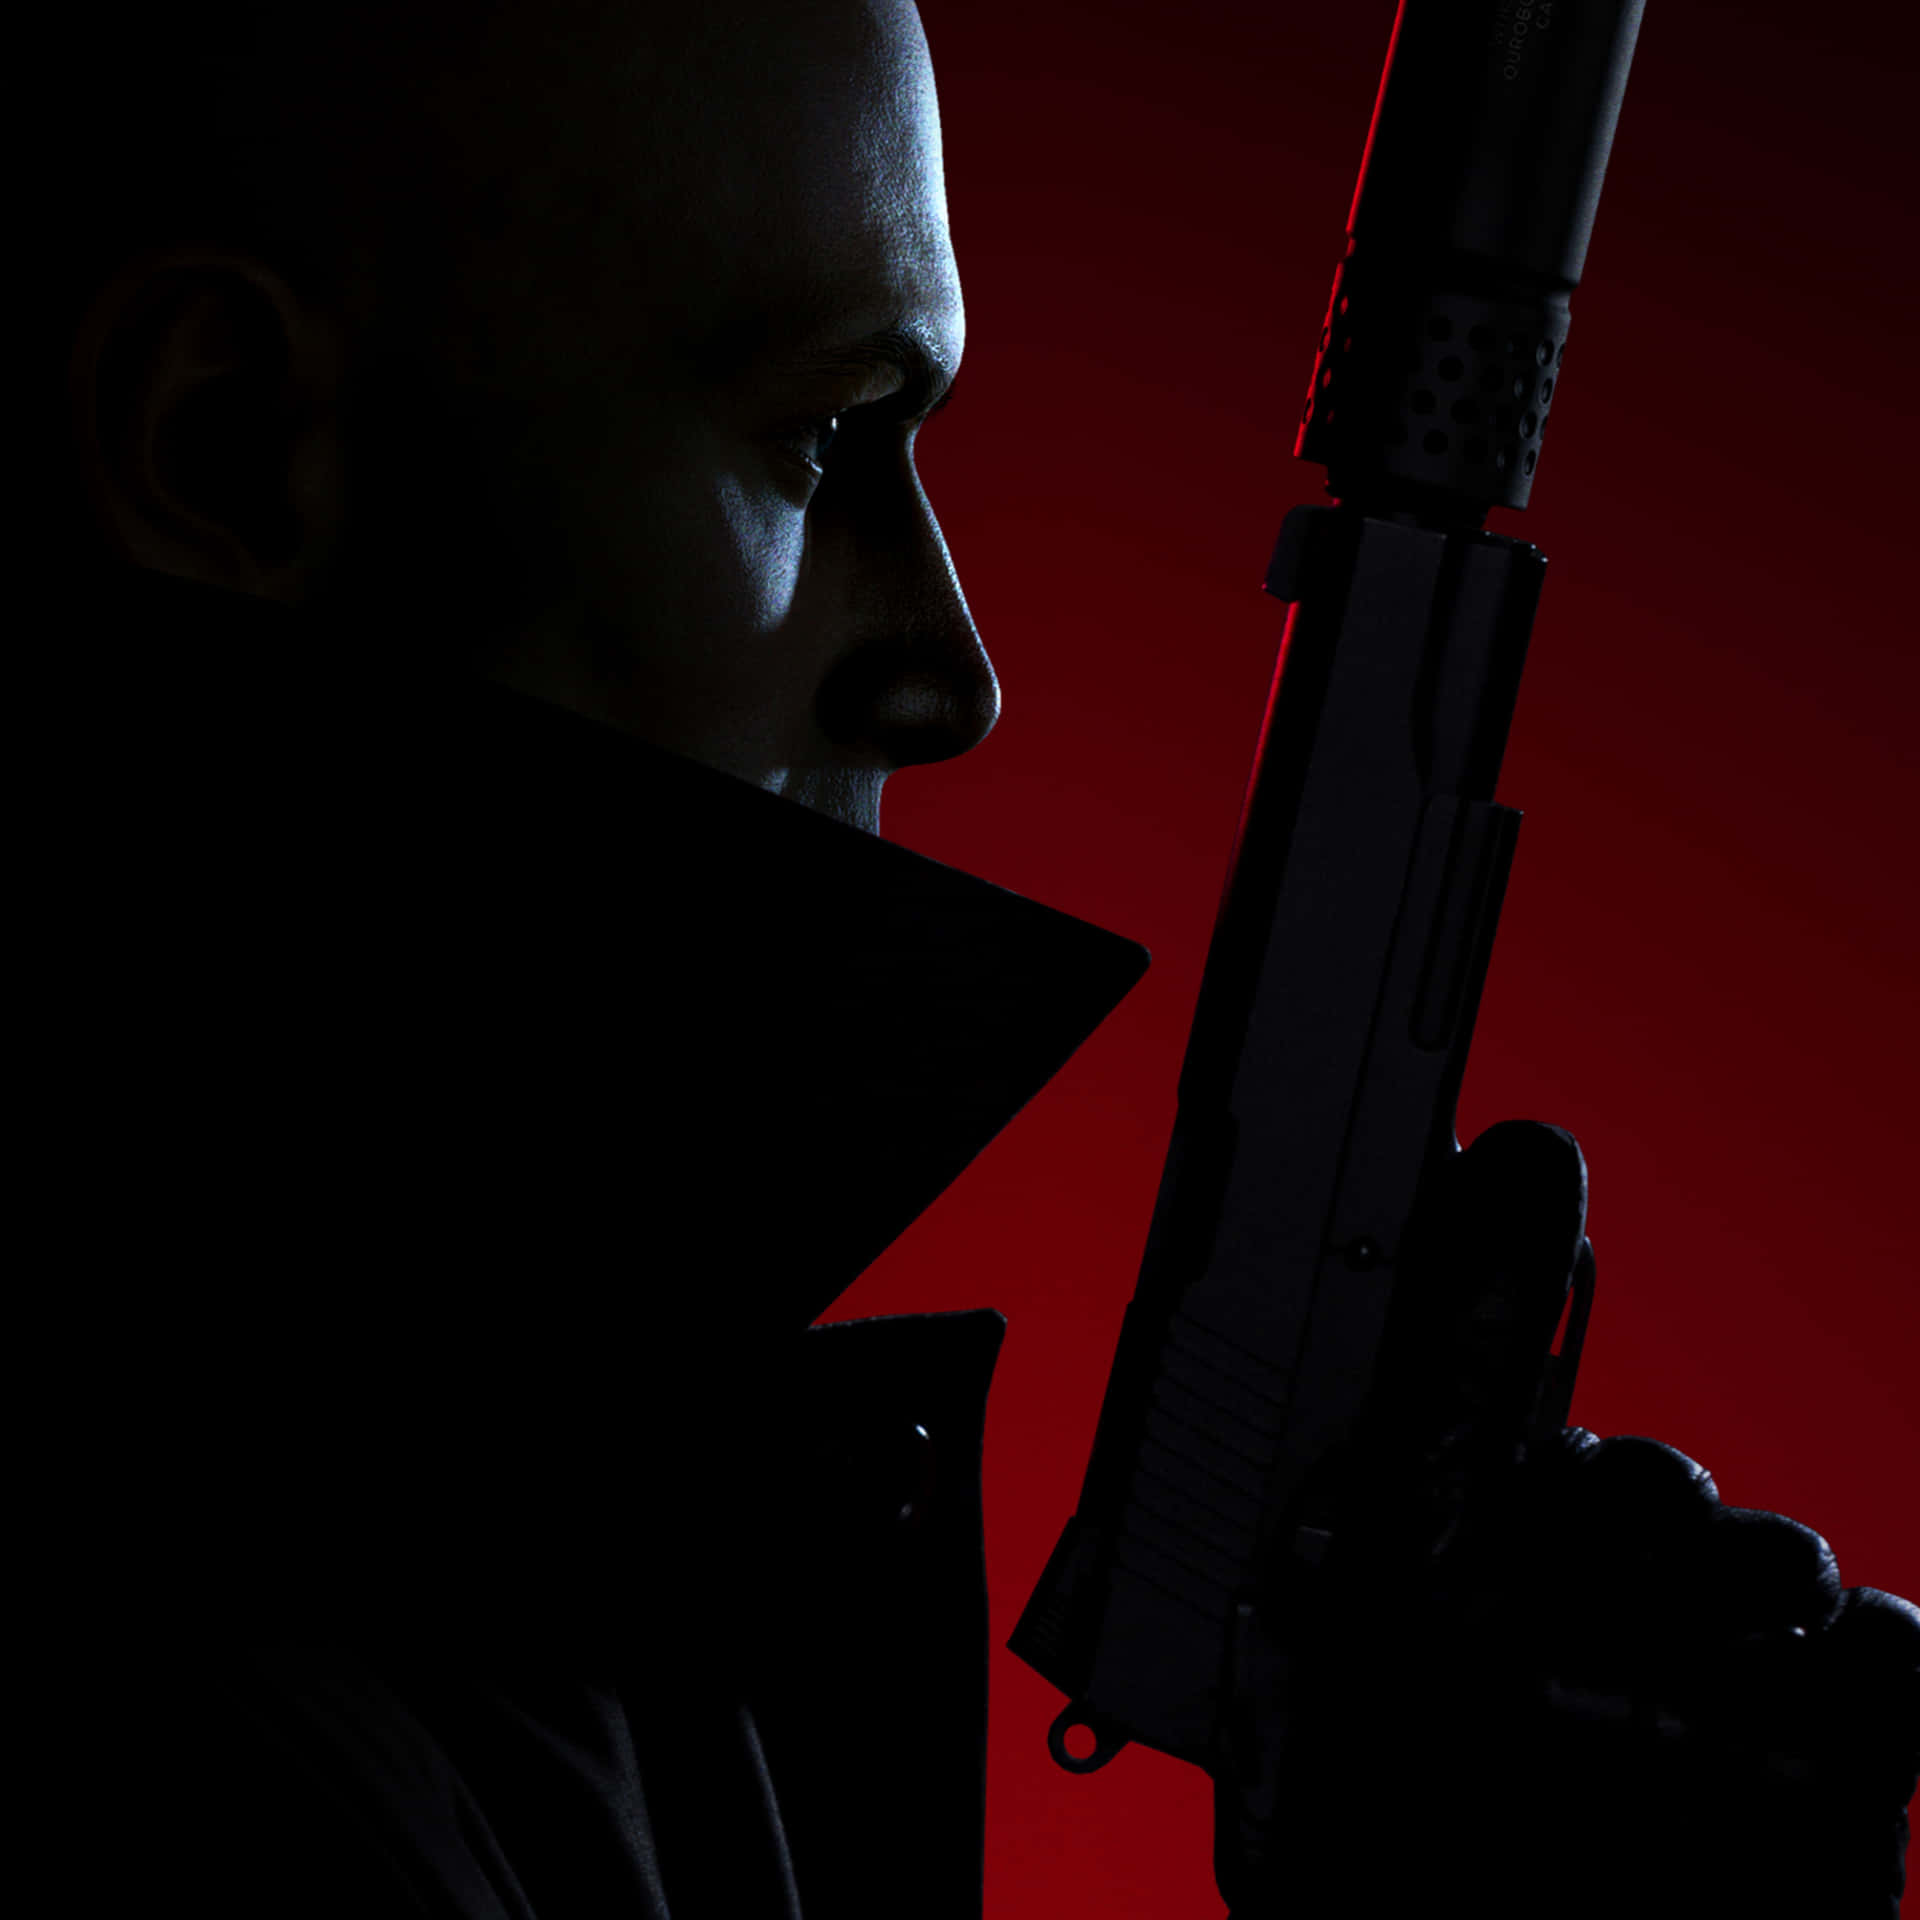 Hitman 3 Agent 47 Pistol With A Silencer Background